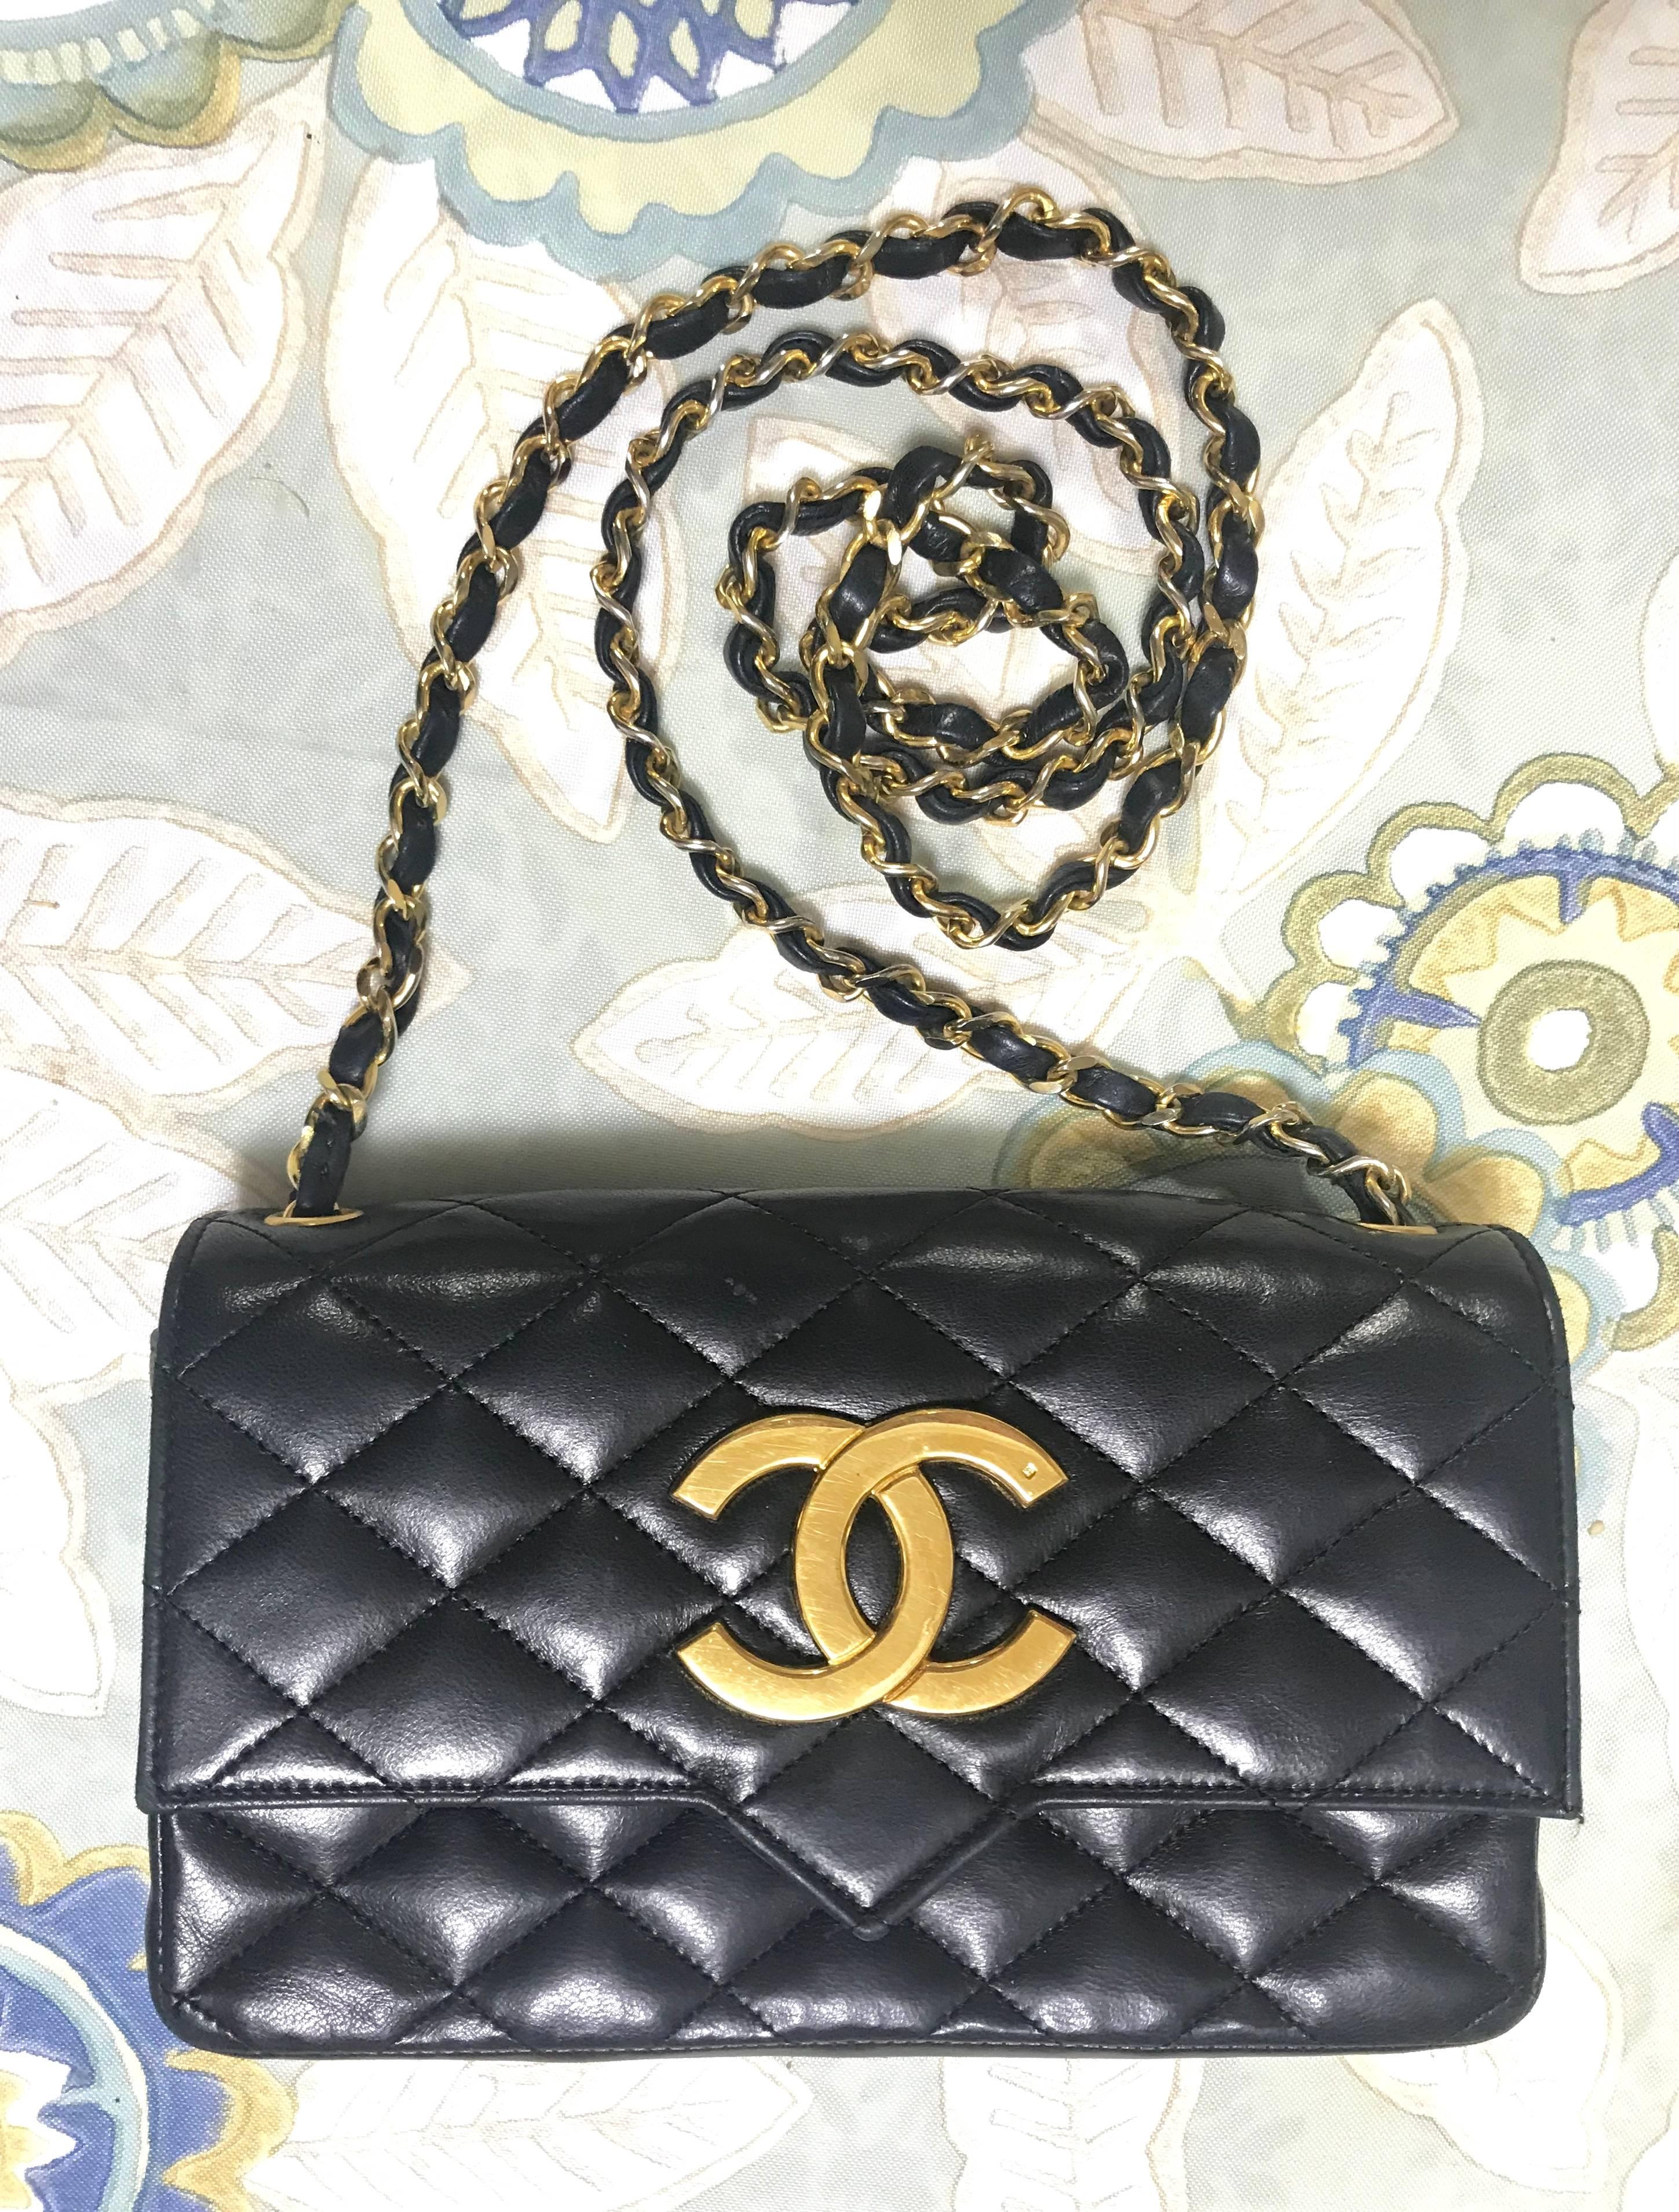 1980's. Vintage CHANEL black lambskin shoulder bag with golden large CC closure and beak tip flap tip. Classic 2.55 bag.

This is a vintage piece from Chanel in the 80's, and is still in a beautiful vintage condition. 
One of the hard-to-find